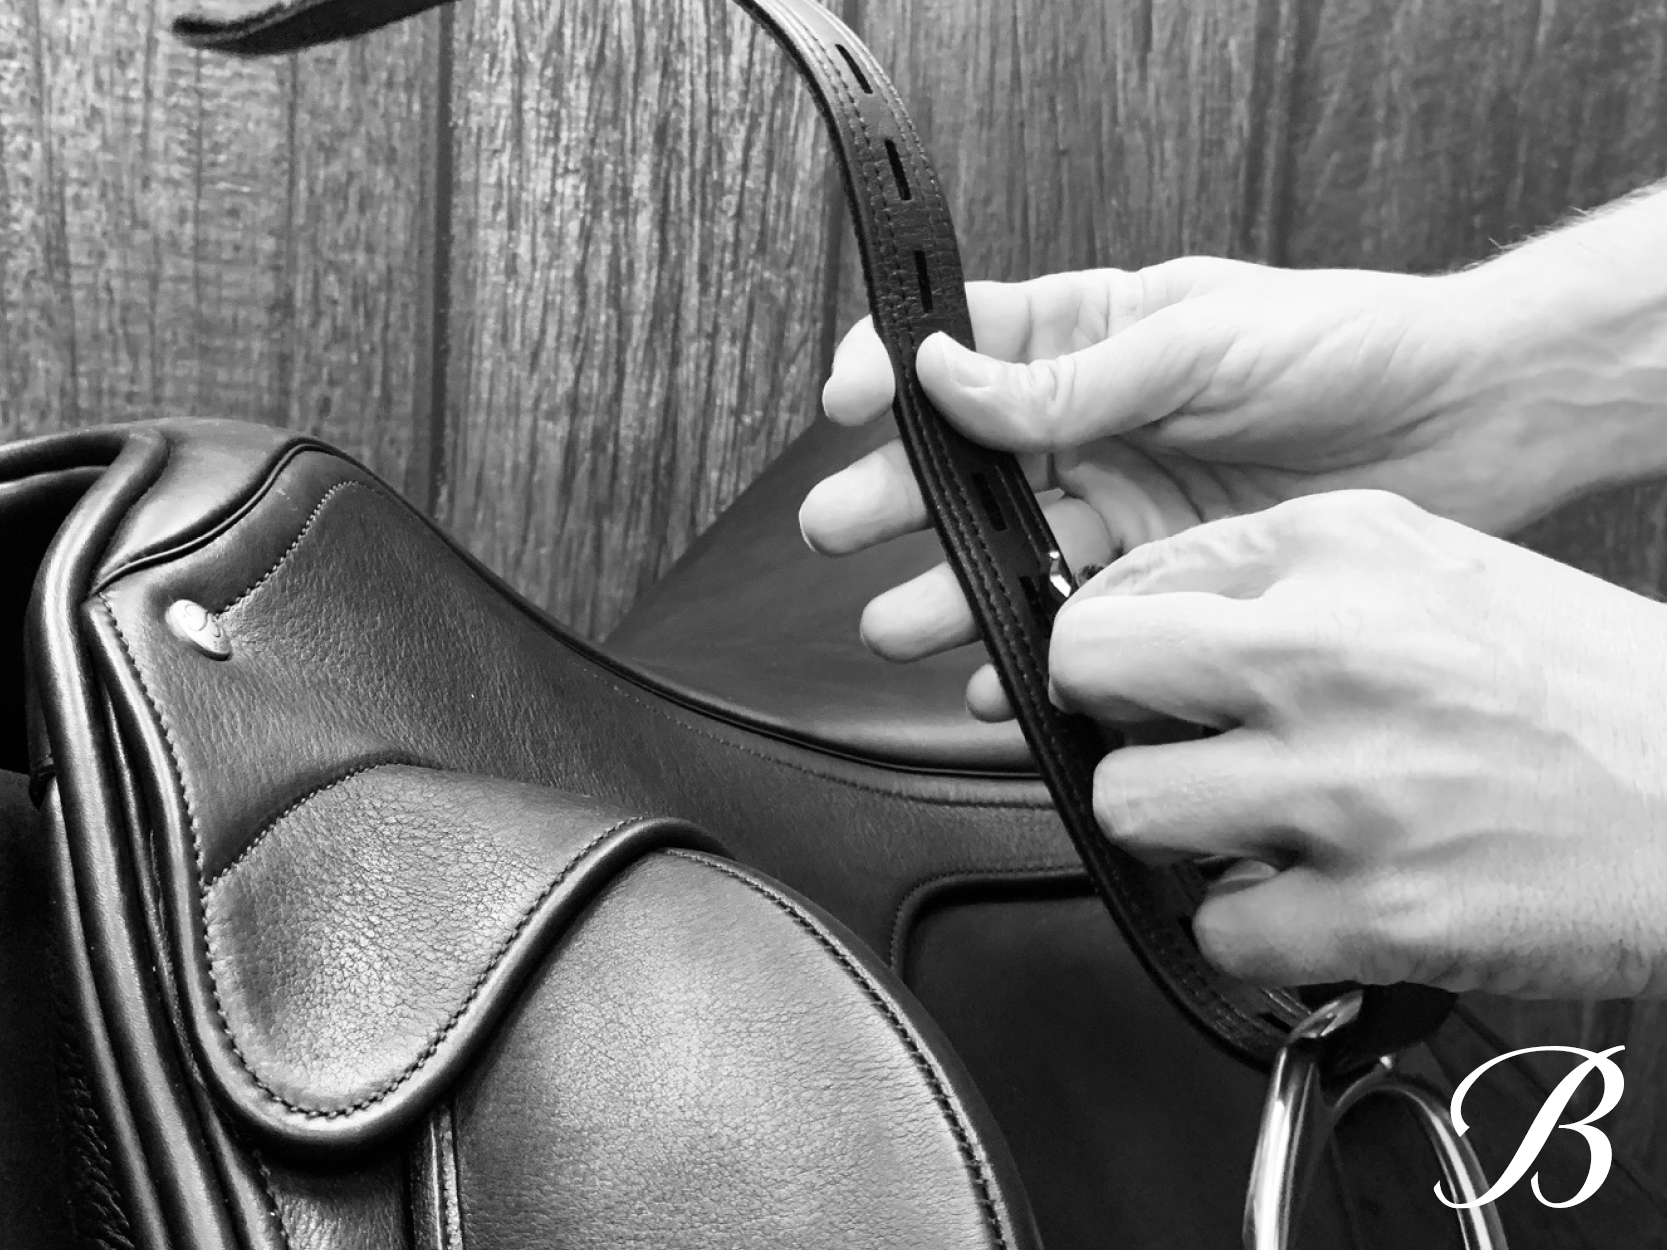 Feel closer to your horse in just 5 minutes with Bates Leather WEBBERS